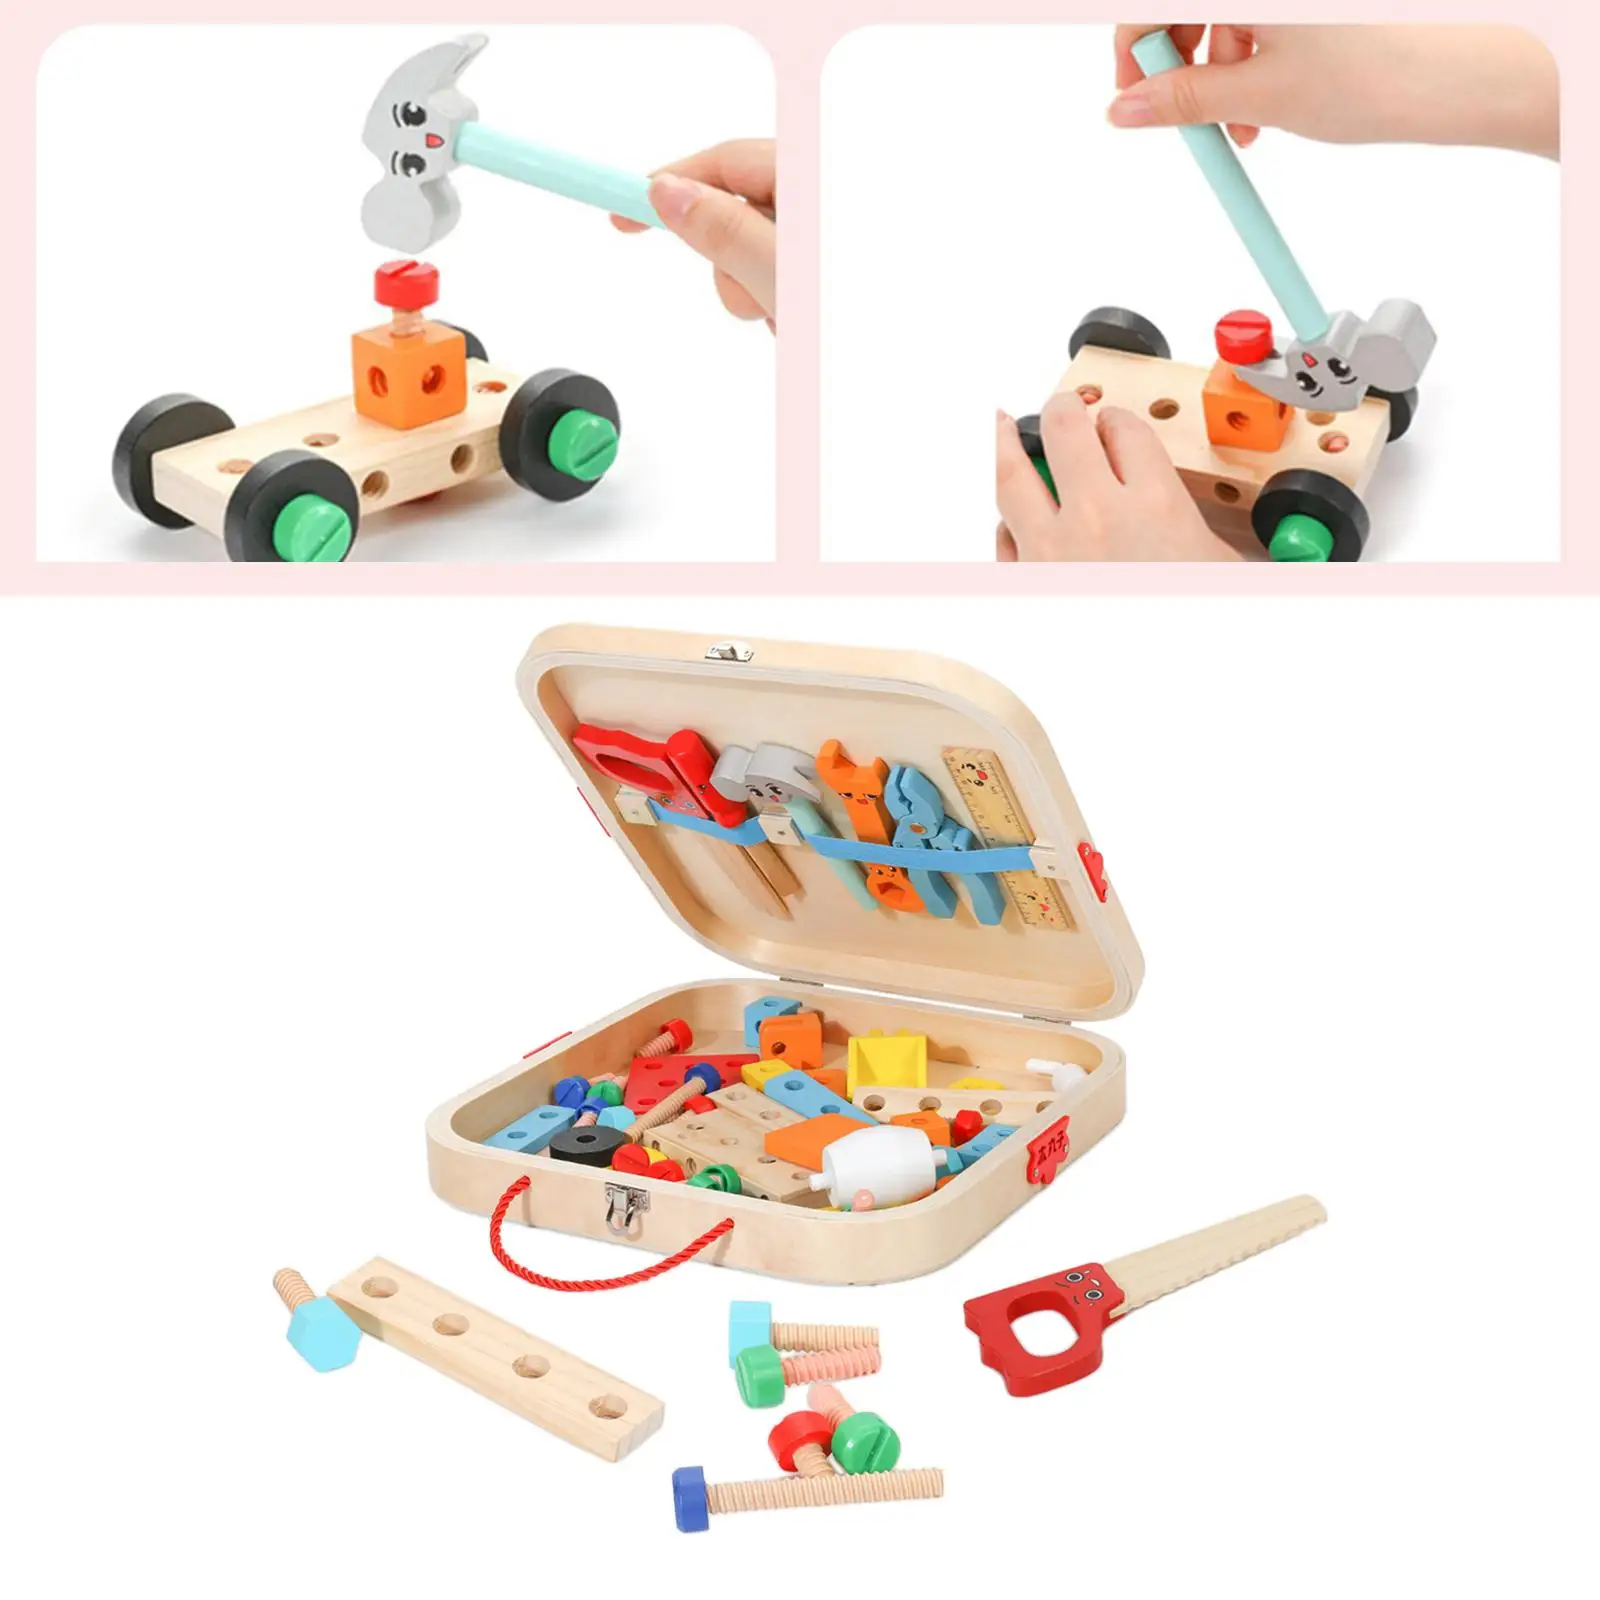 Wooden Kid Tool Set for Toddlers Smooth Wooden Toy Tool Box for DIY Home Bedroom Living Room and 3 4 5 6 Year Old Boys and Girls